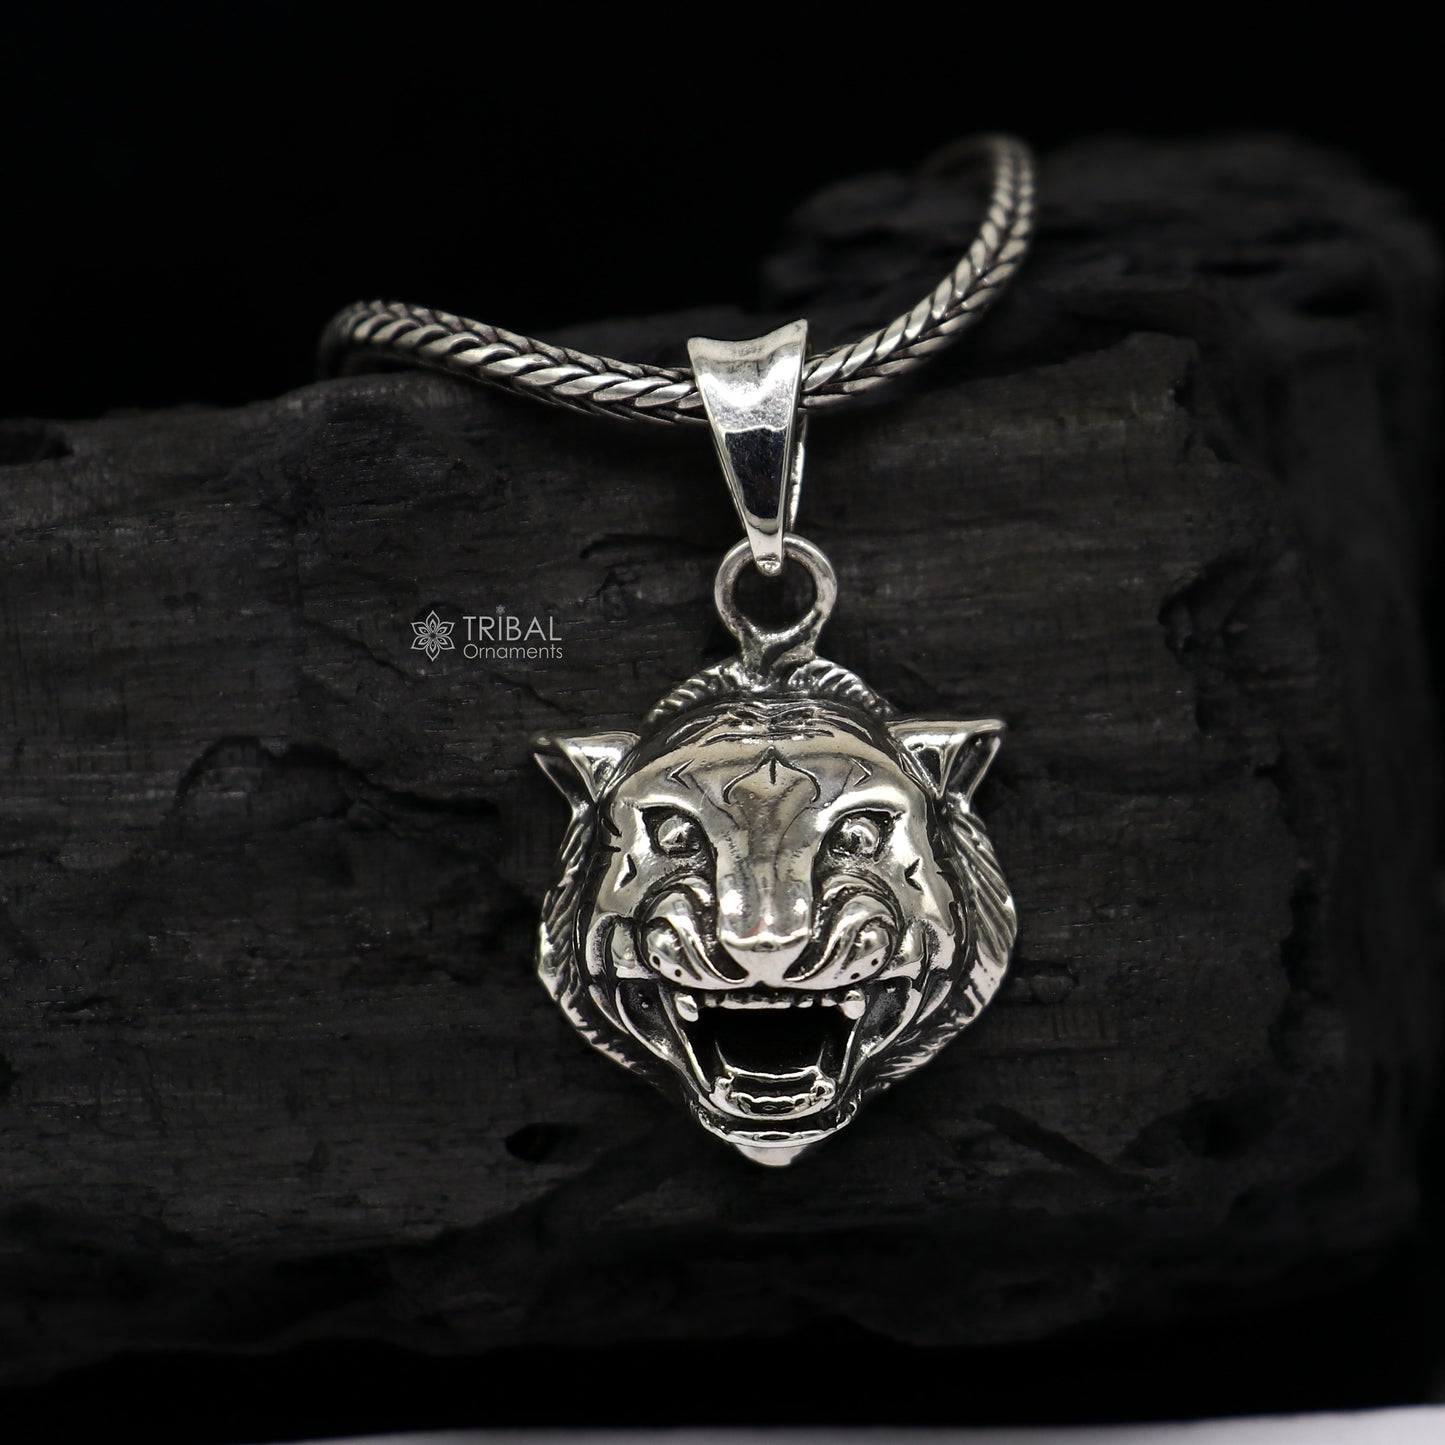 925 sterling silver LION FACE pendant symbolizes qualities associated with lions, such as courage, strength, and leadership nsp707 - TRIBAL ORNAMENTS